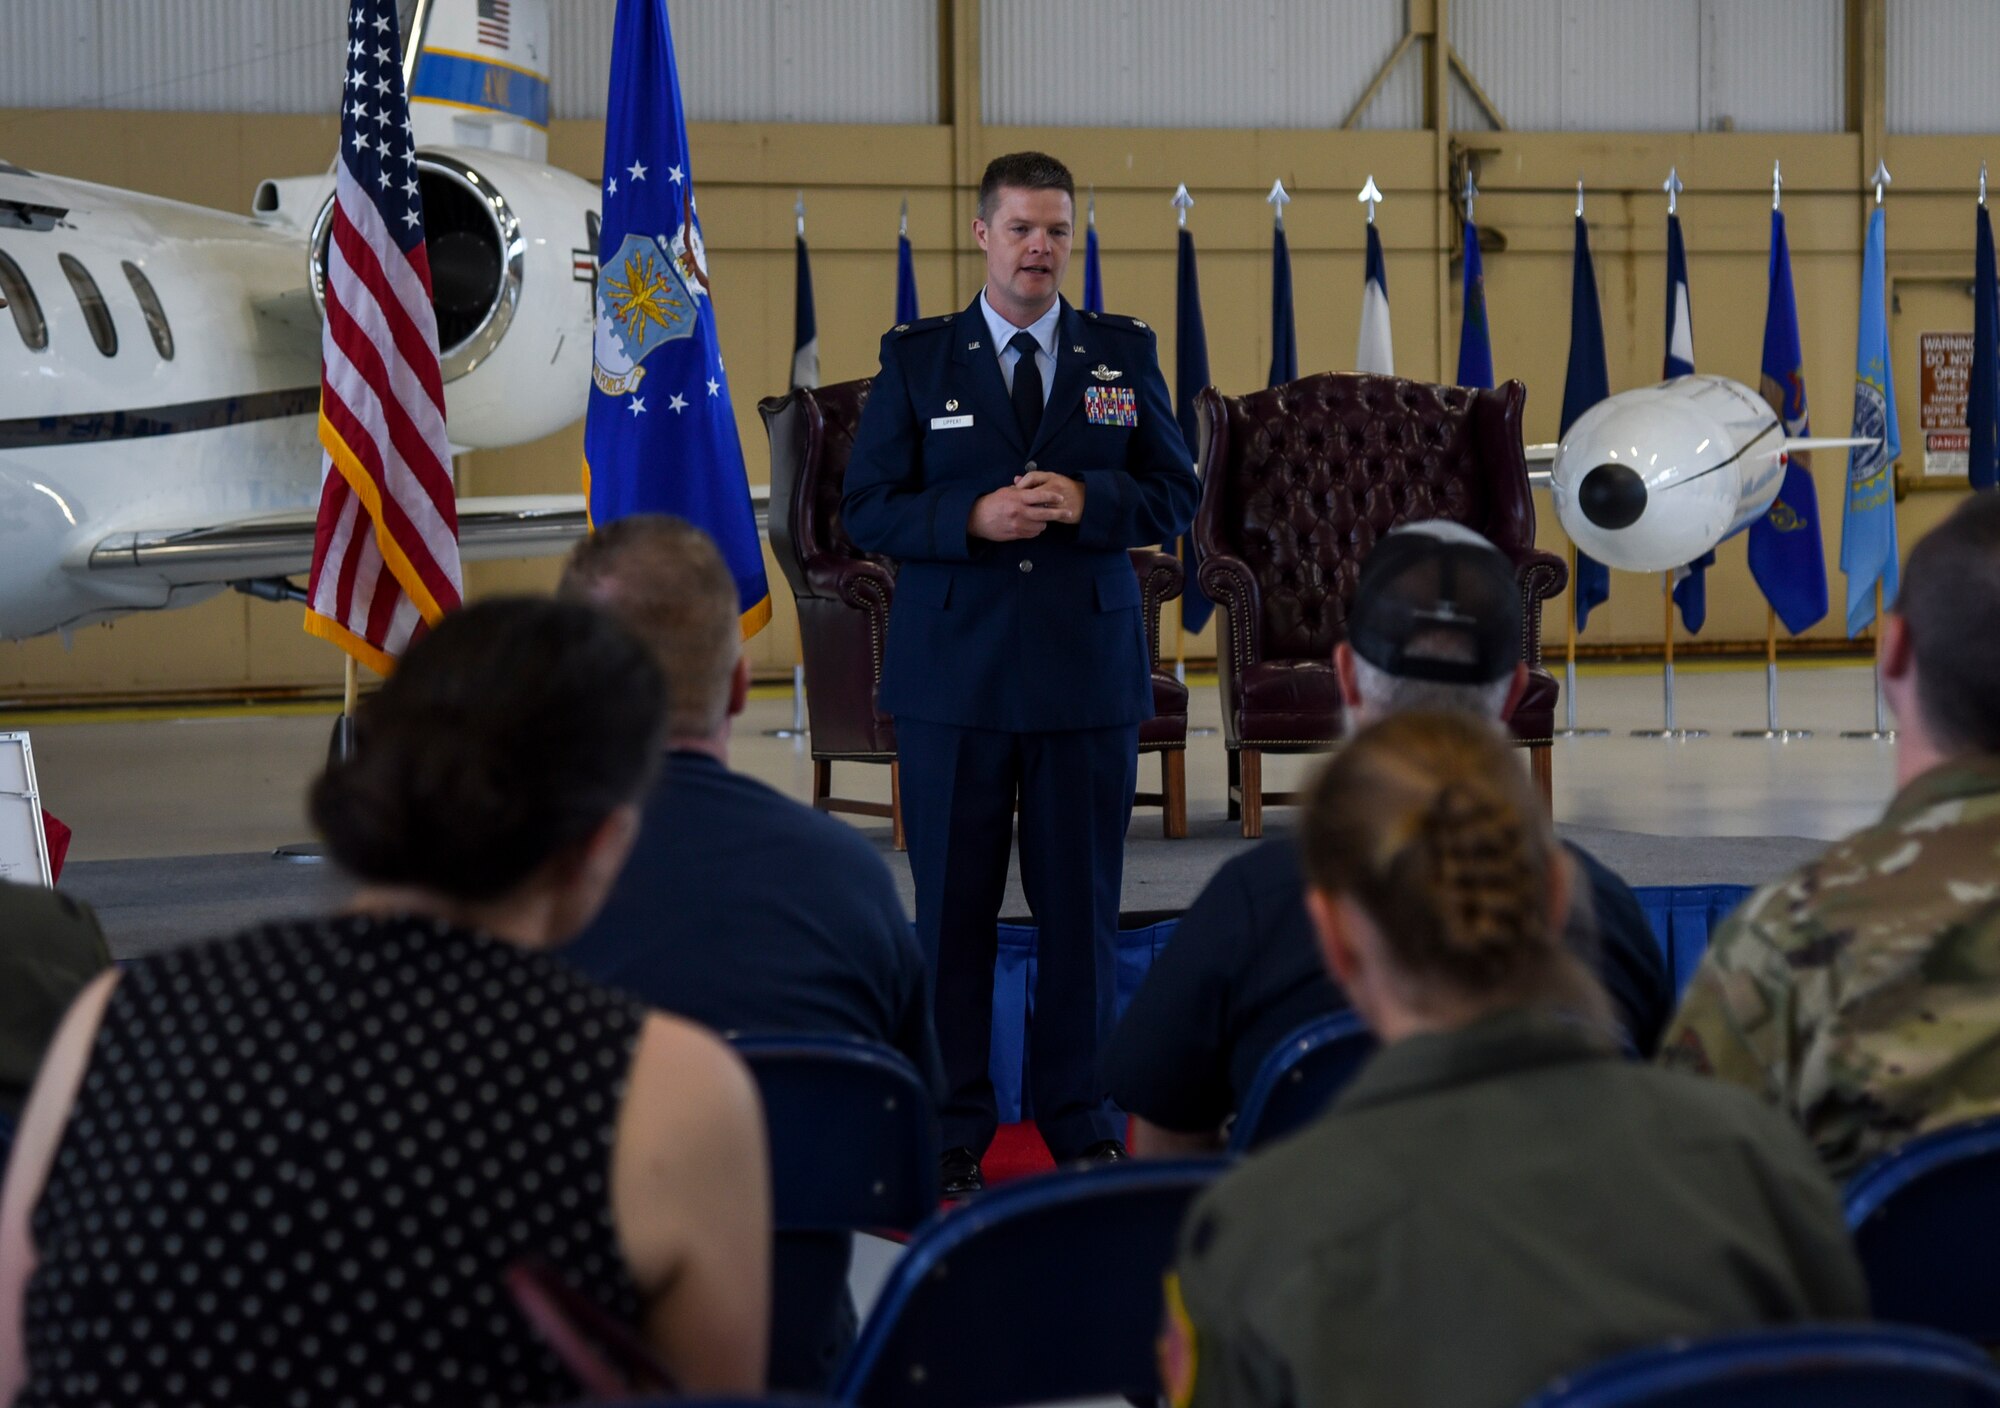 Lt. Col. Royce Lippert, 457th Airlift Squadron commander, speaks to past and present members during an inactivation ceremony for the 457th AS at Joint Base Andrews, Maryland, June 14, 2019. The unit was inactivated as part of a consolidation effort of the C-21 inventory to Scott Air Force Base, Ill. (U.S. Air Force photo by Senior Airman Chad Gorecki)